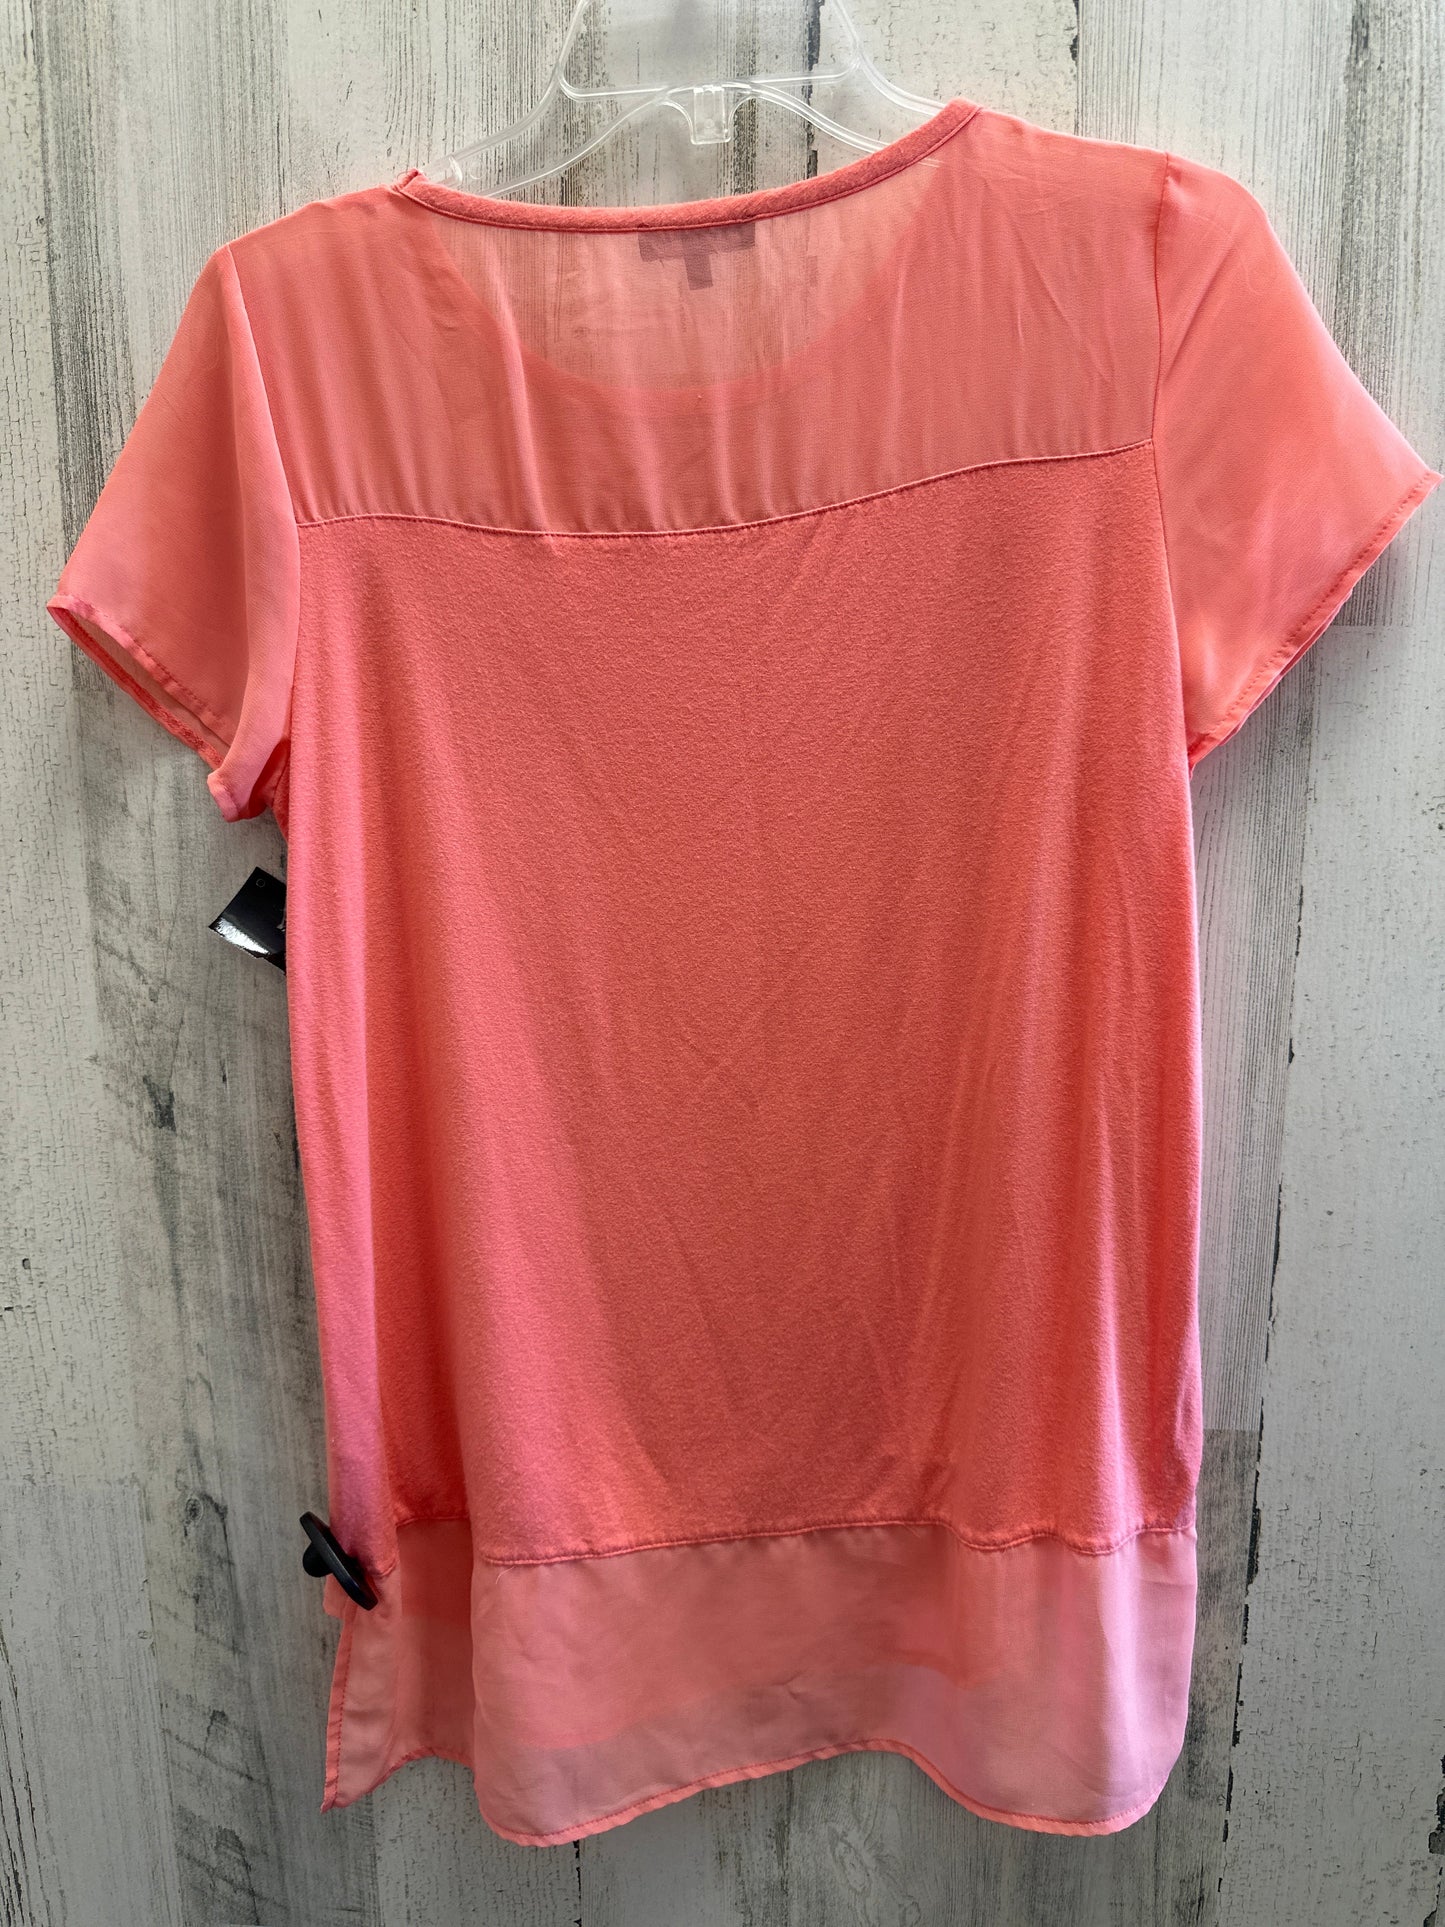 Pink Top Short Sleeve Vince Camuto, Size S